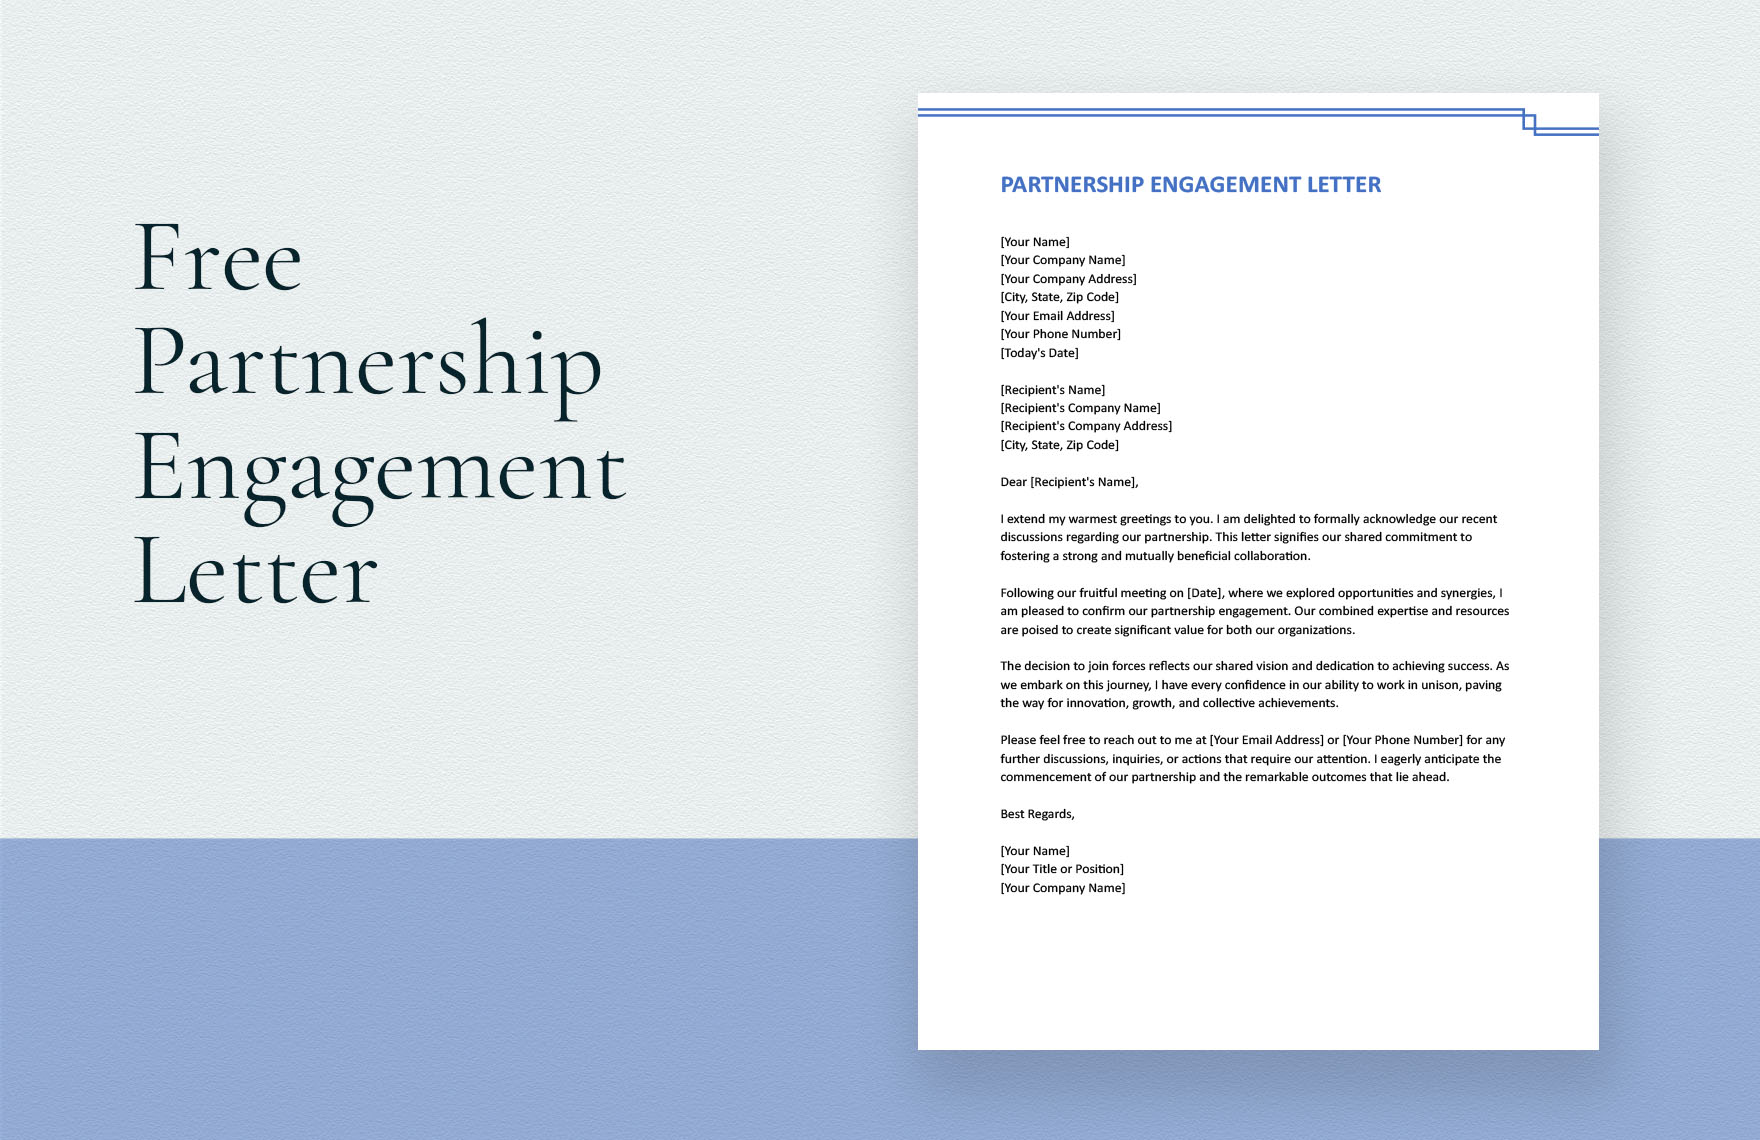 Free Partnership Engagement Letter in Word, Google Docs